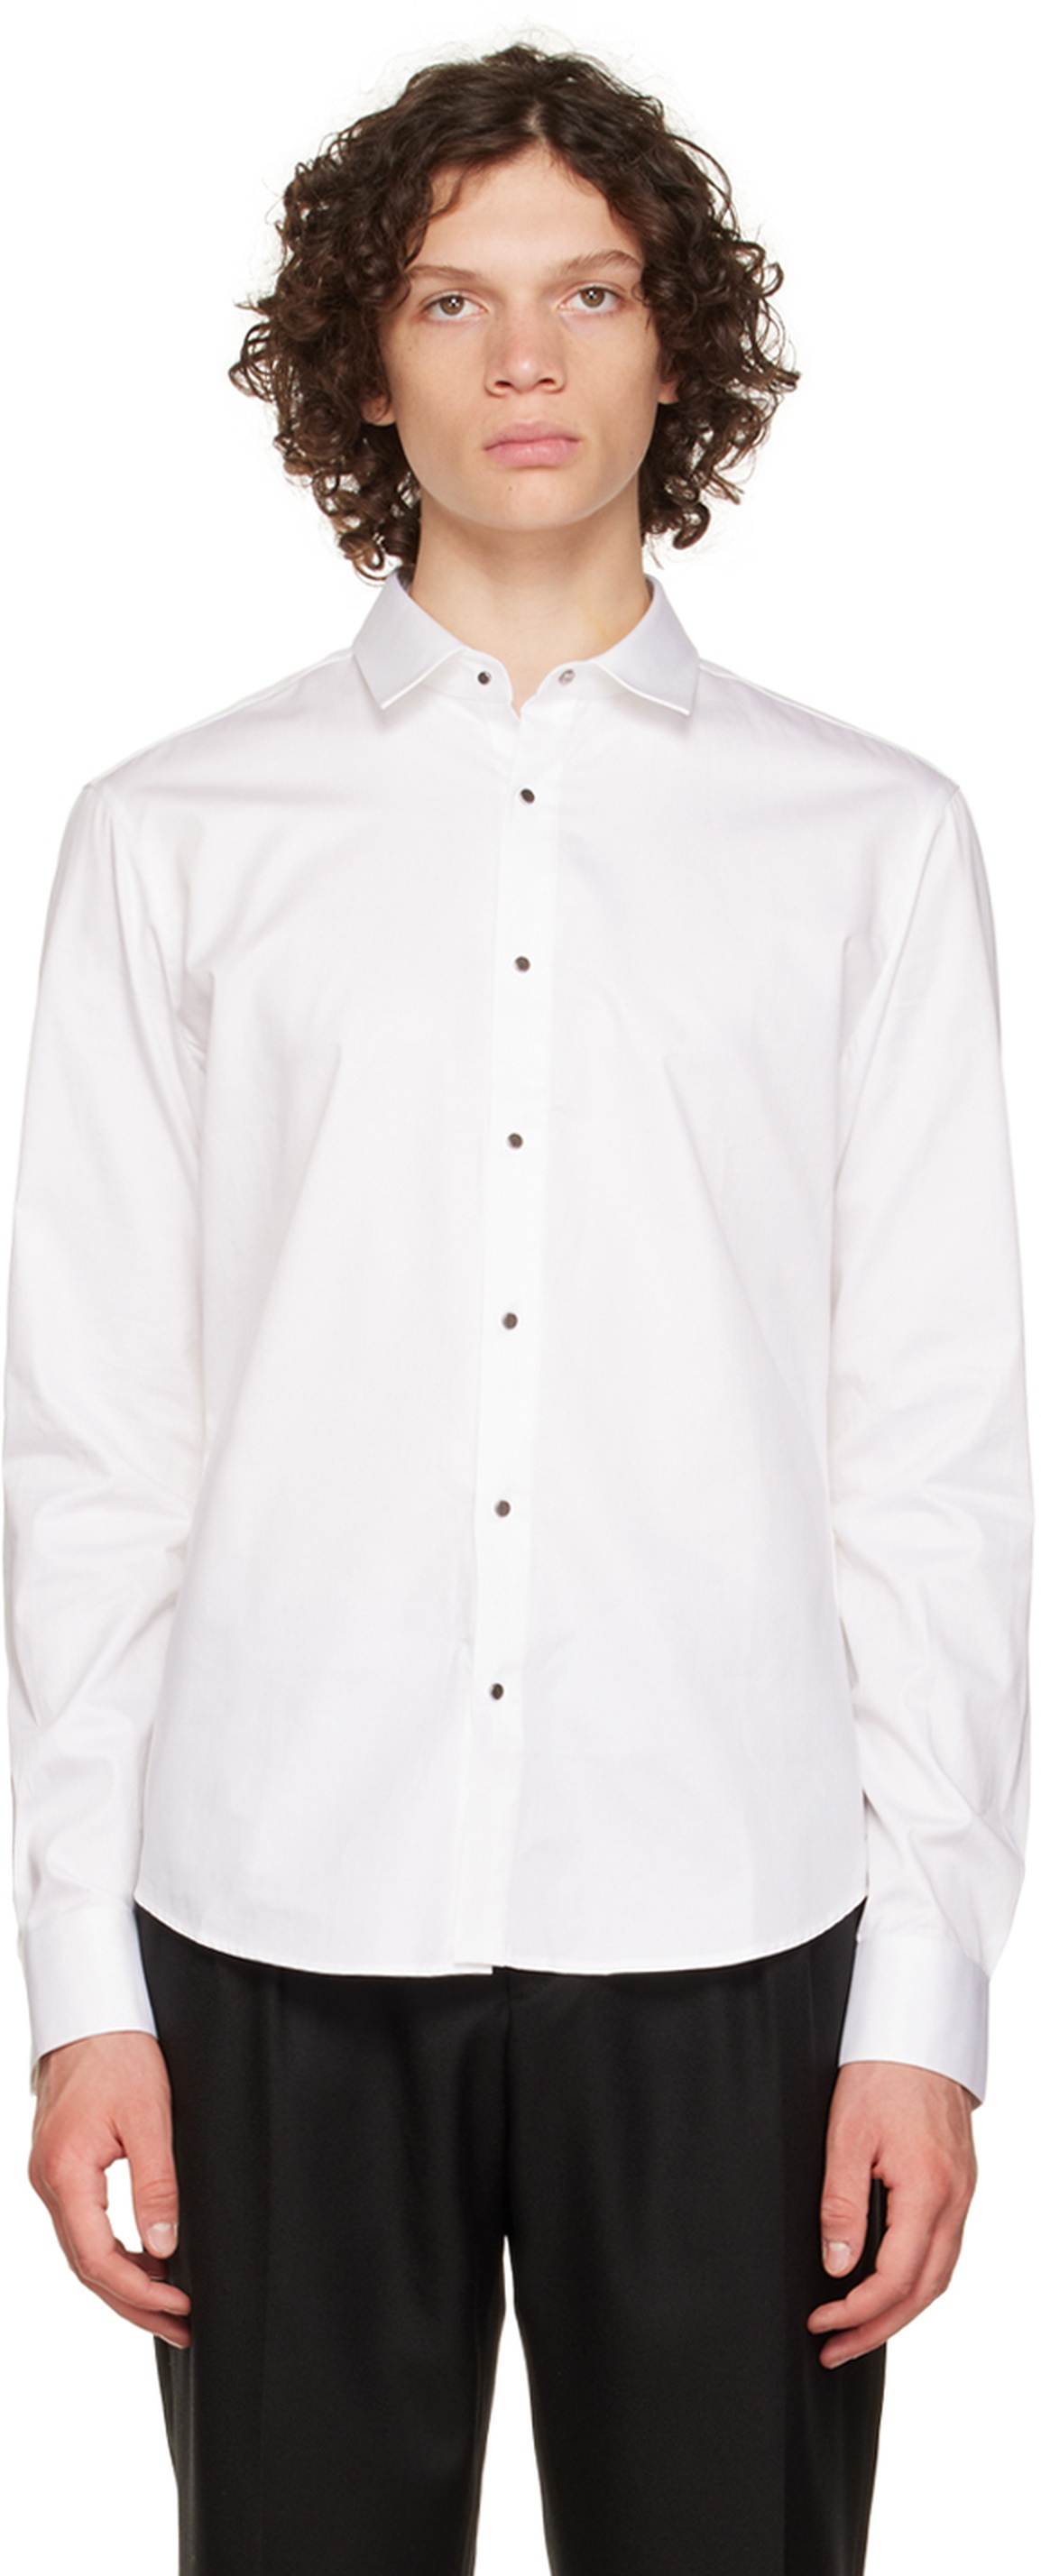 Wooyoungmi White Spread Collar Shirt Wooyoungmi